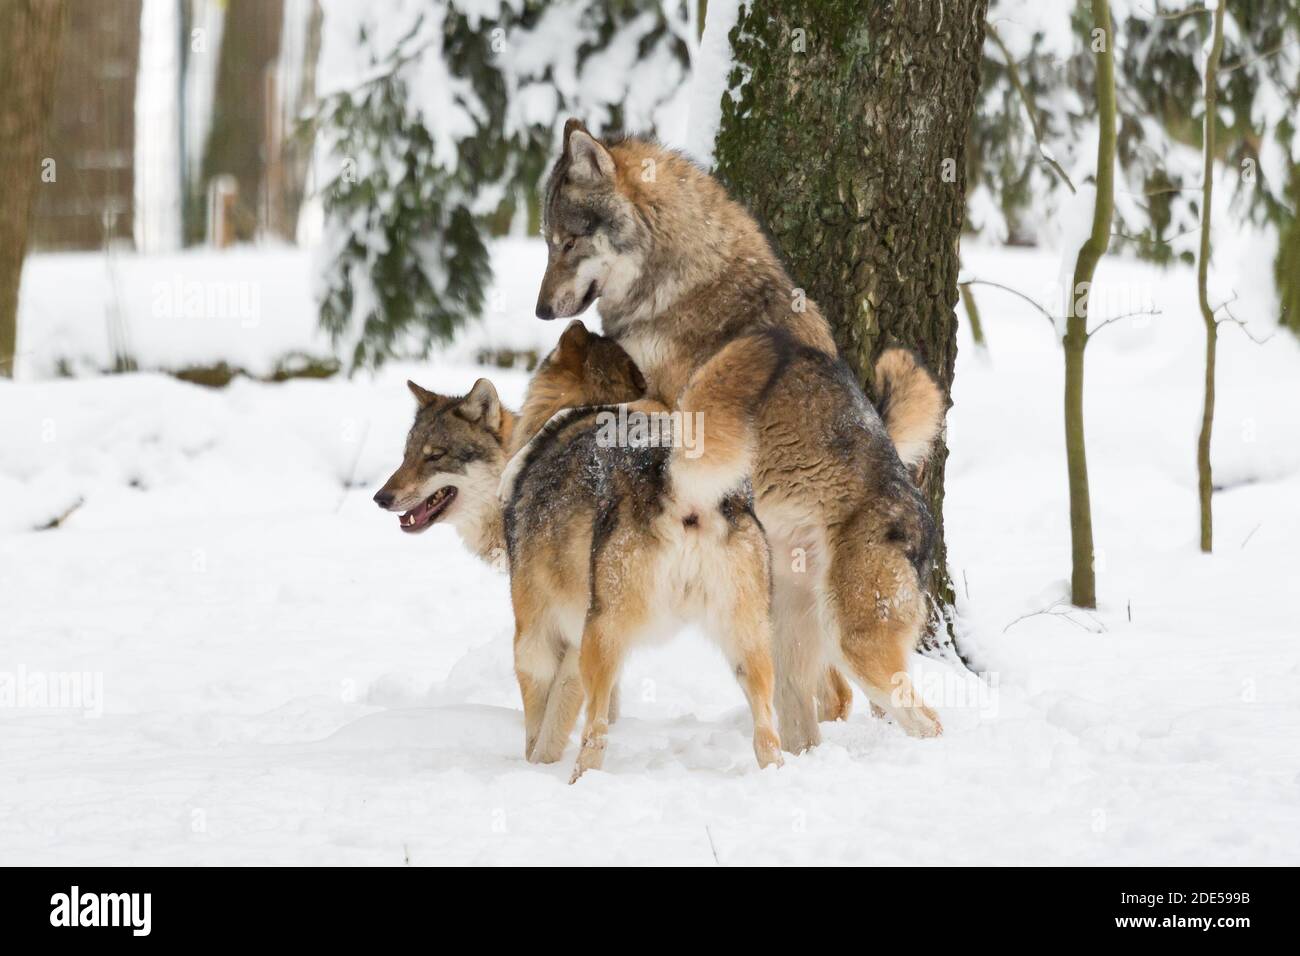 Europeans wolves playfully jumping on each other in a snow-covered winter landscape Stock Photo